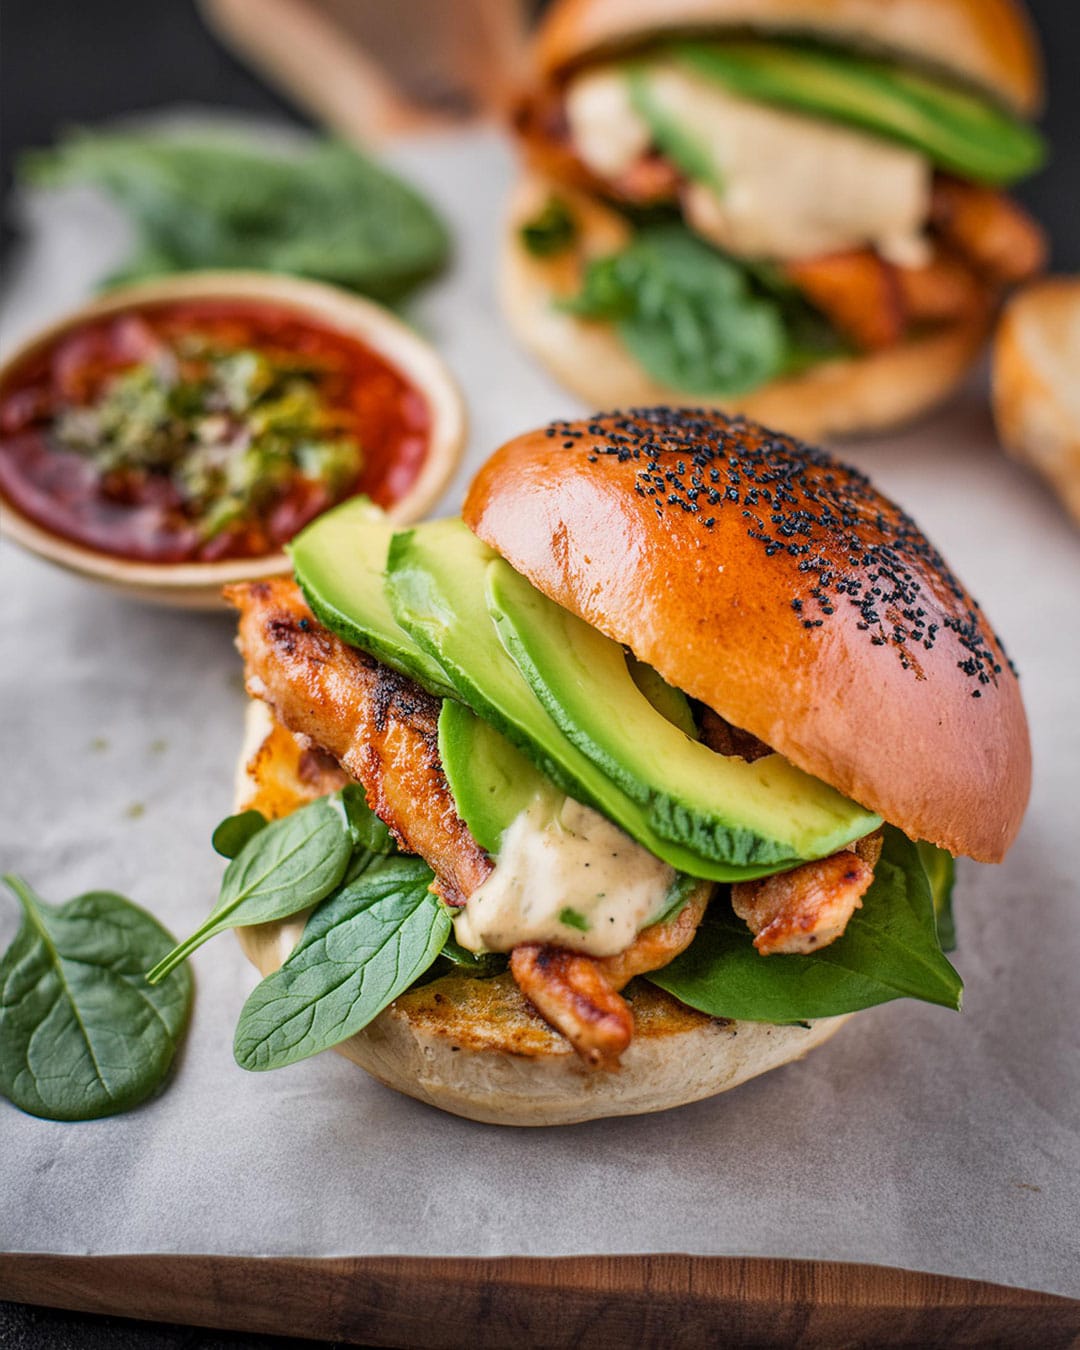 Cajun spiced chicken burgers with bacon, cheese and avocado